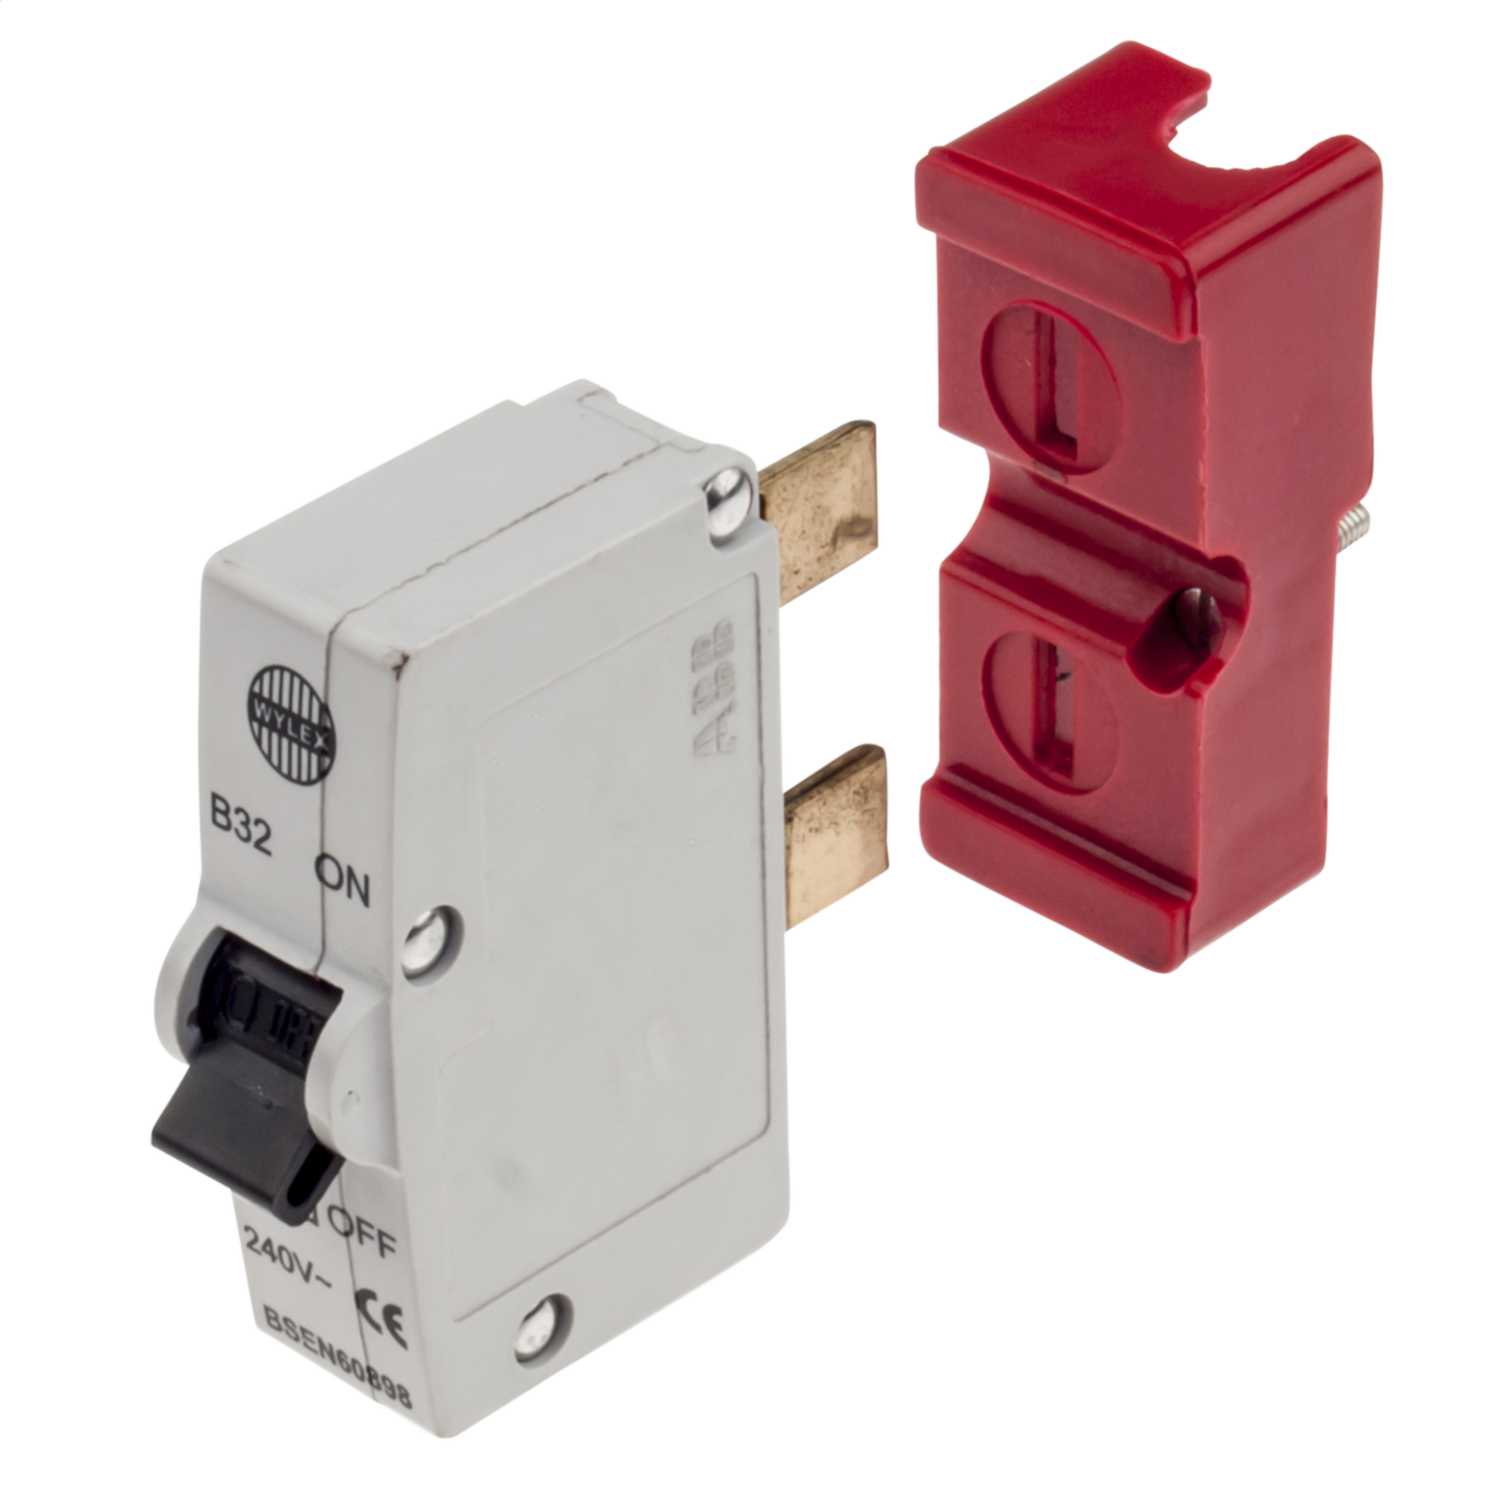 WYLEX 32 AMP MCB with RED BASESHIELD B32 PUSH PLUG IN 32A